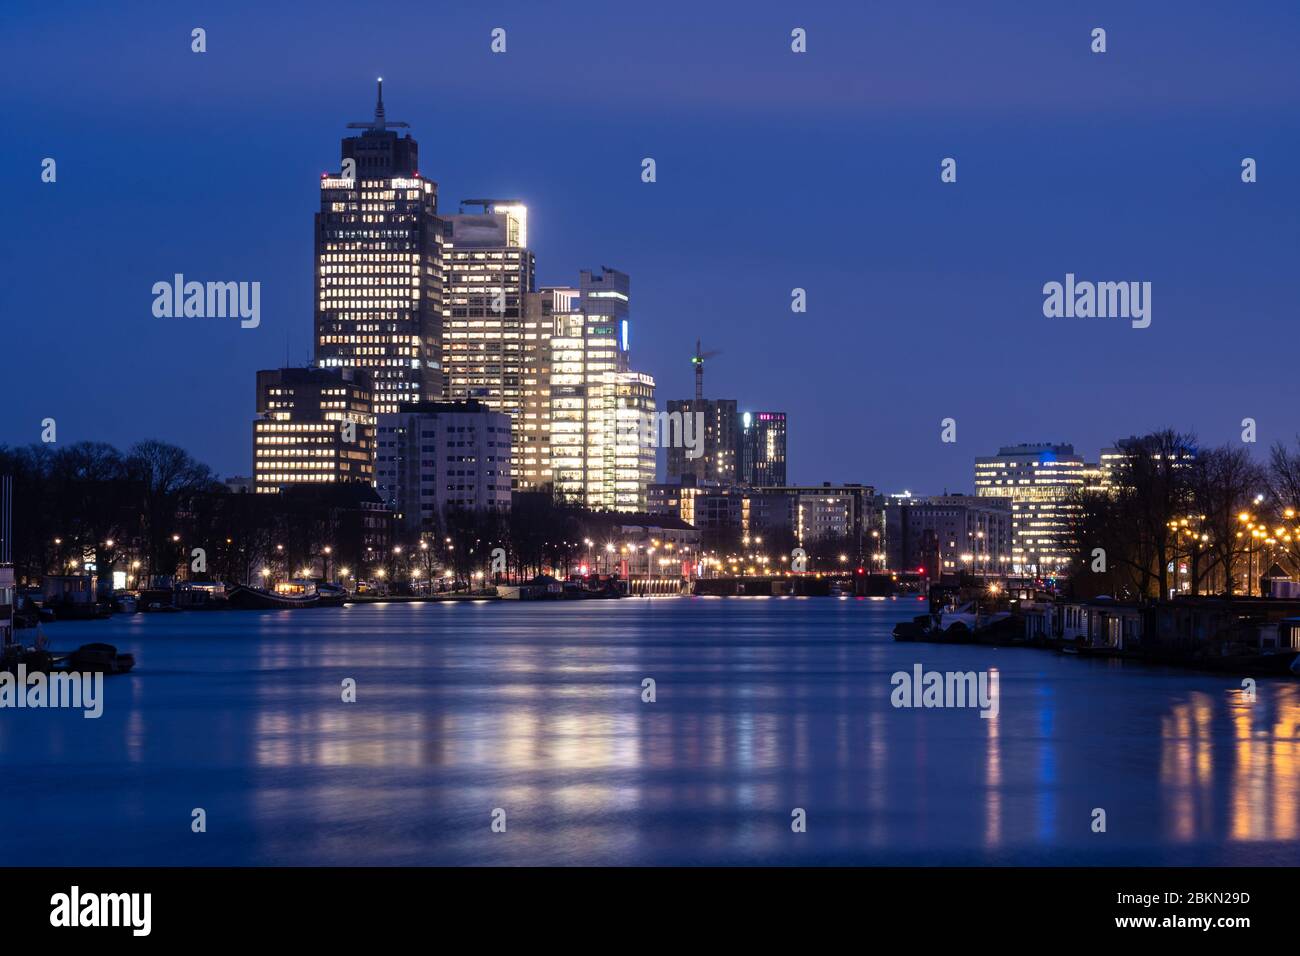 Modern office towers at dawn in Amsterdam Amstel business district in the Netherlands largest city. Shot as a long exposure to smooth the water motion Stock Photo